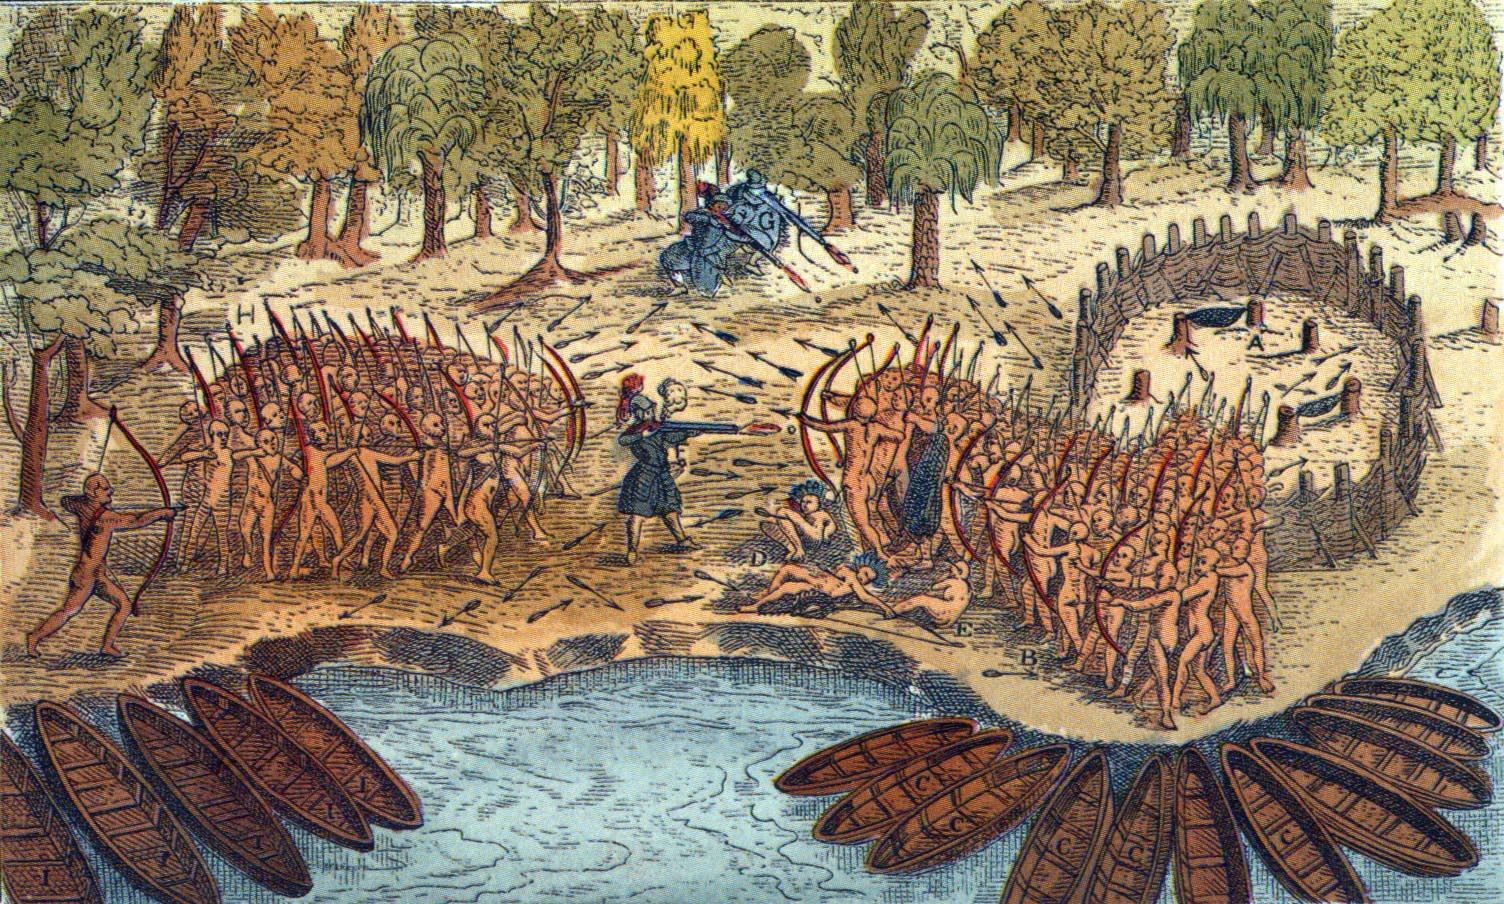 Two groups of naked soldiers shoot arrows at each other. Soldiers with guns shoot at one of the other groups.